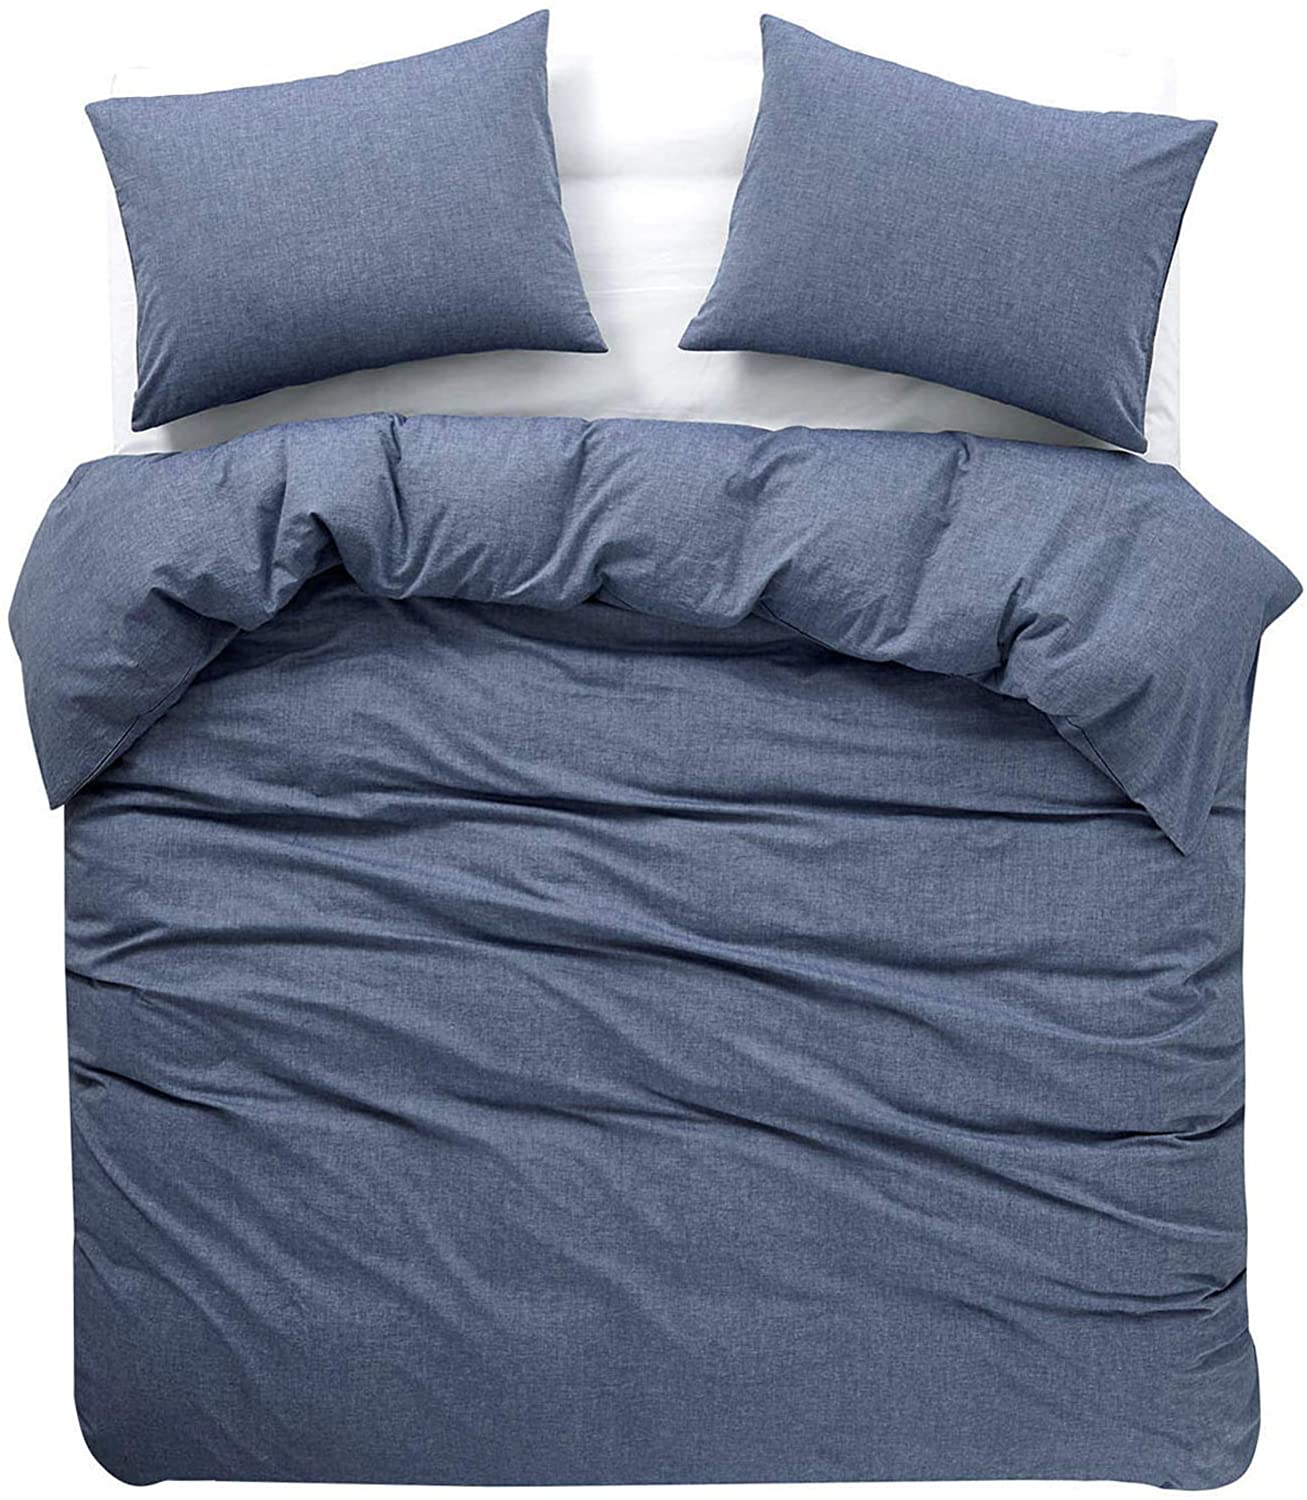 Price:$89.99  In Cloud - Denim Blue Duvet Cover Set, 100% Washed Cotton Yarn Dyed Plain Solid Color, Comfy Bedding with Zipper Closure Corner Ties (3pcs, King Size) : Home & Kitchen